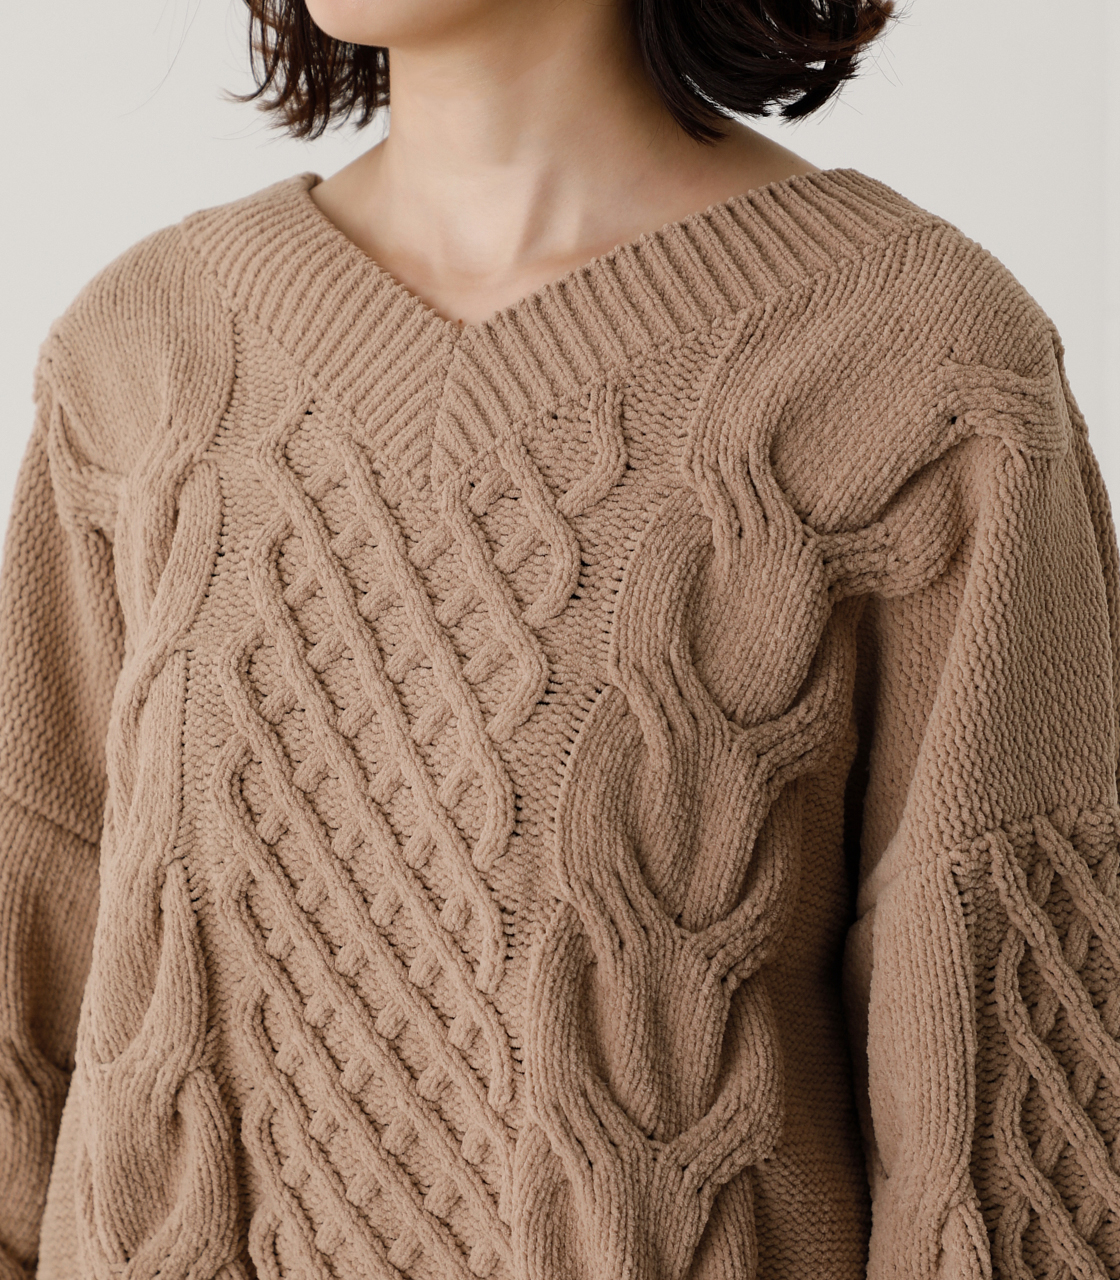 CHENILLE CABLE V/N KNIT TOPS/シェニールケーブルVネックニットトップス 詳細画像 BEG 7